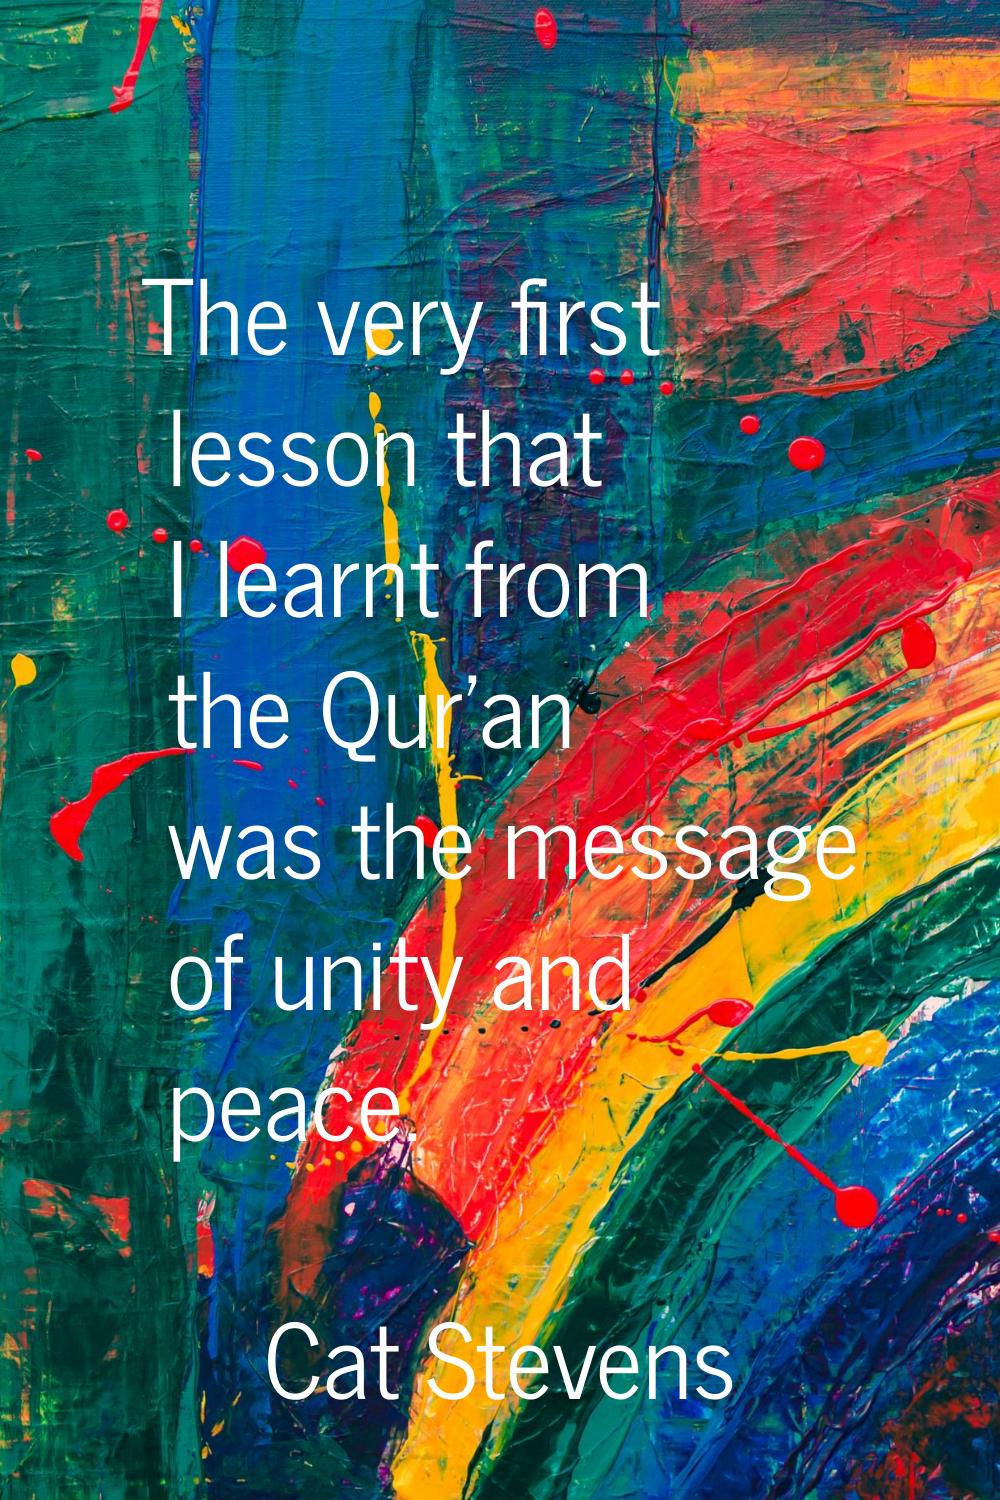 The very first lesson that I learnt from the Qur'an was the message of unity and peace.